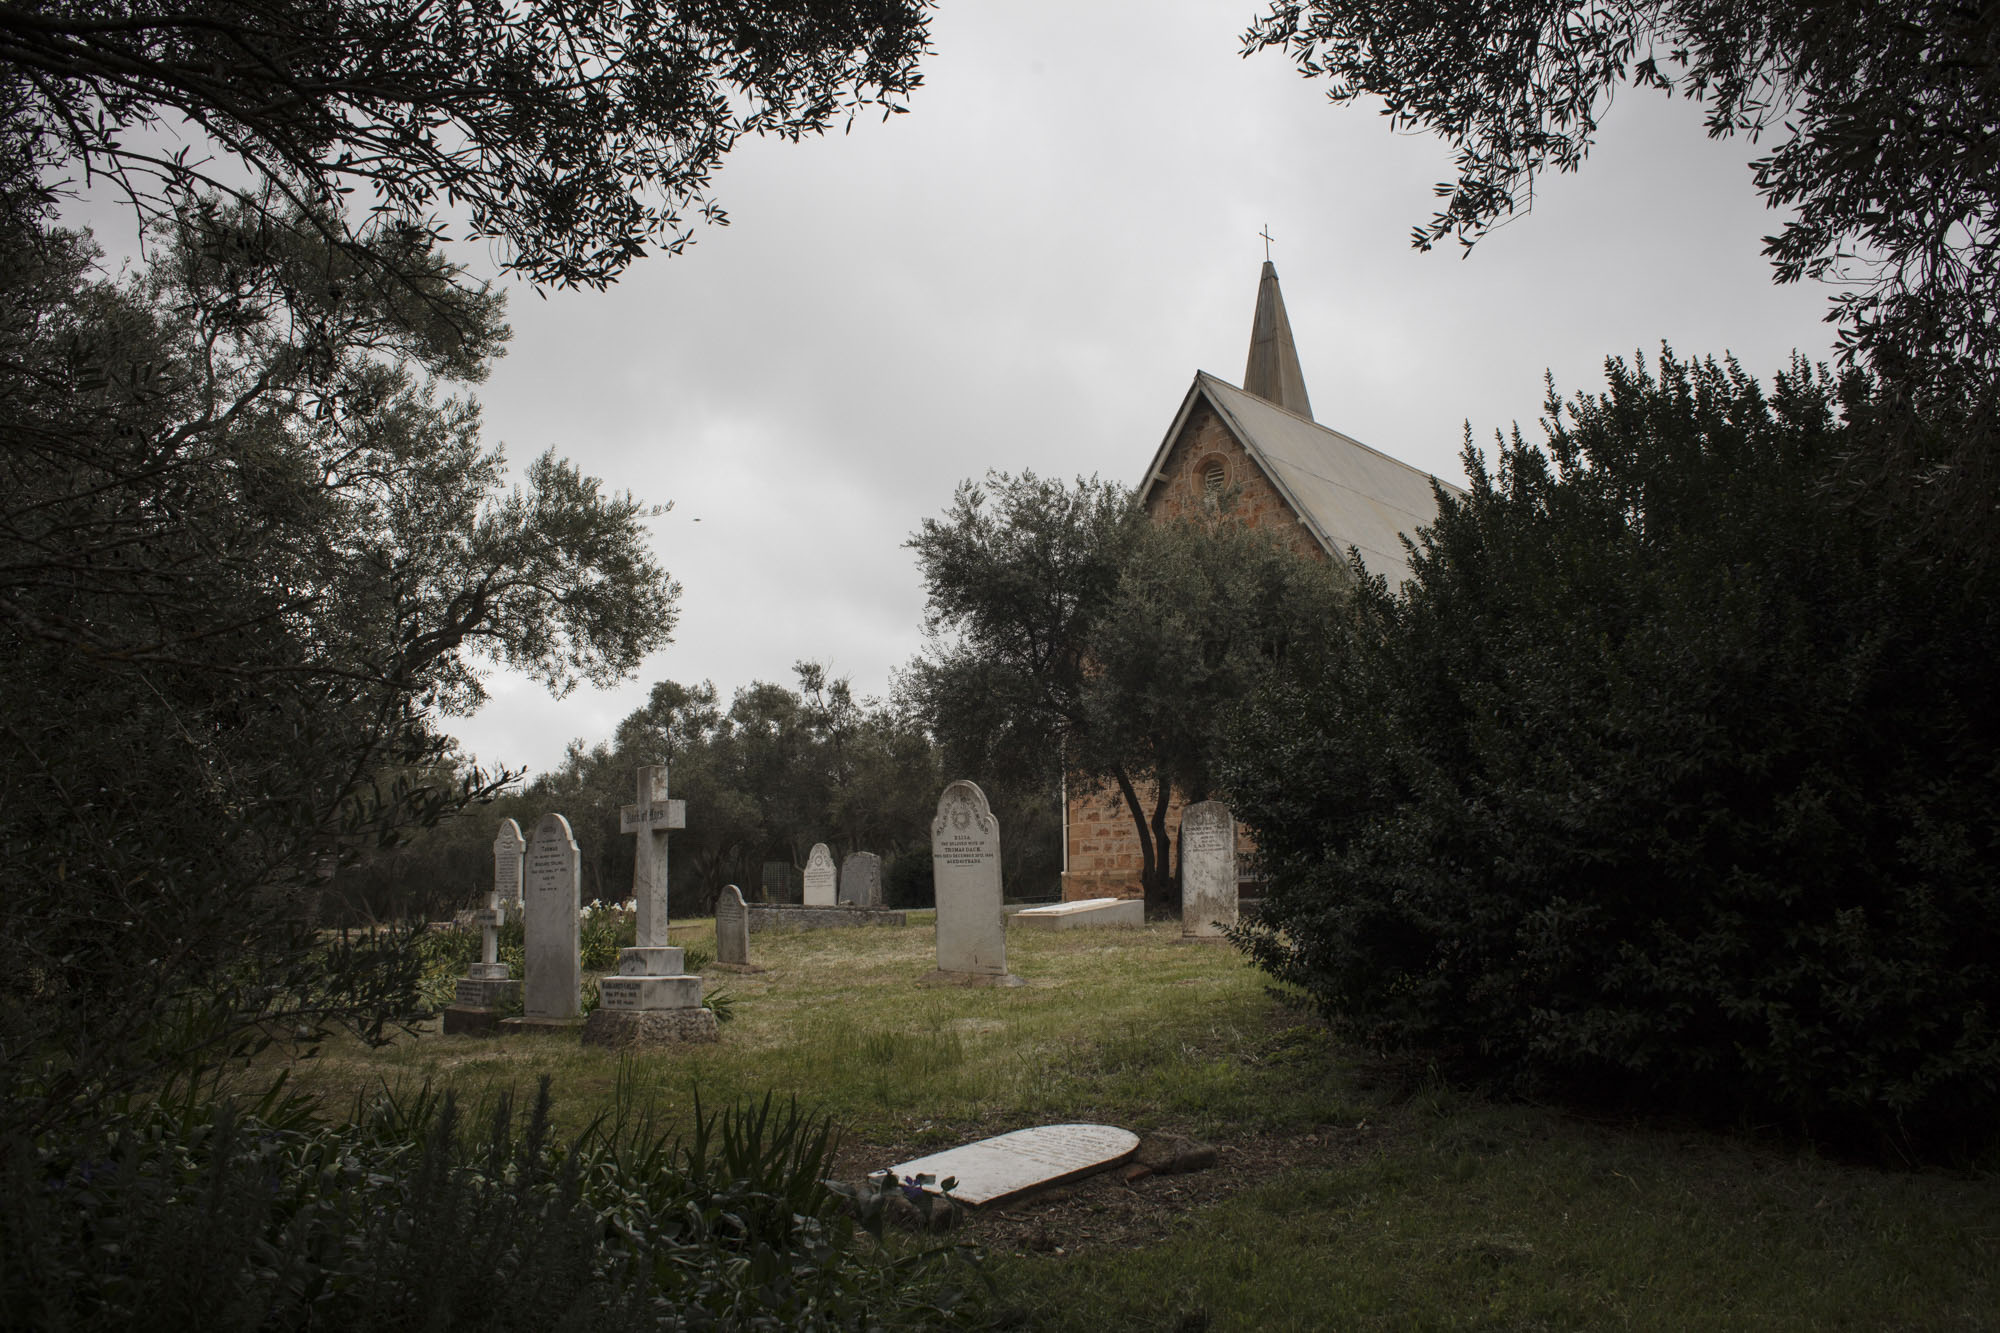  “CLICK GO THE SHEARS – FOR 175 YEARS” EVENT at Bungaree Station, South Australia.
Hawker Family Church and Graveyard on the station. The church is not owned by the family any more 